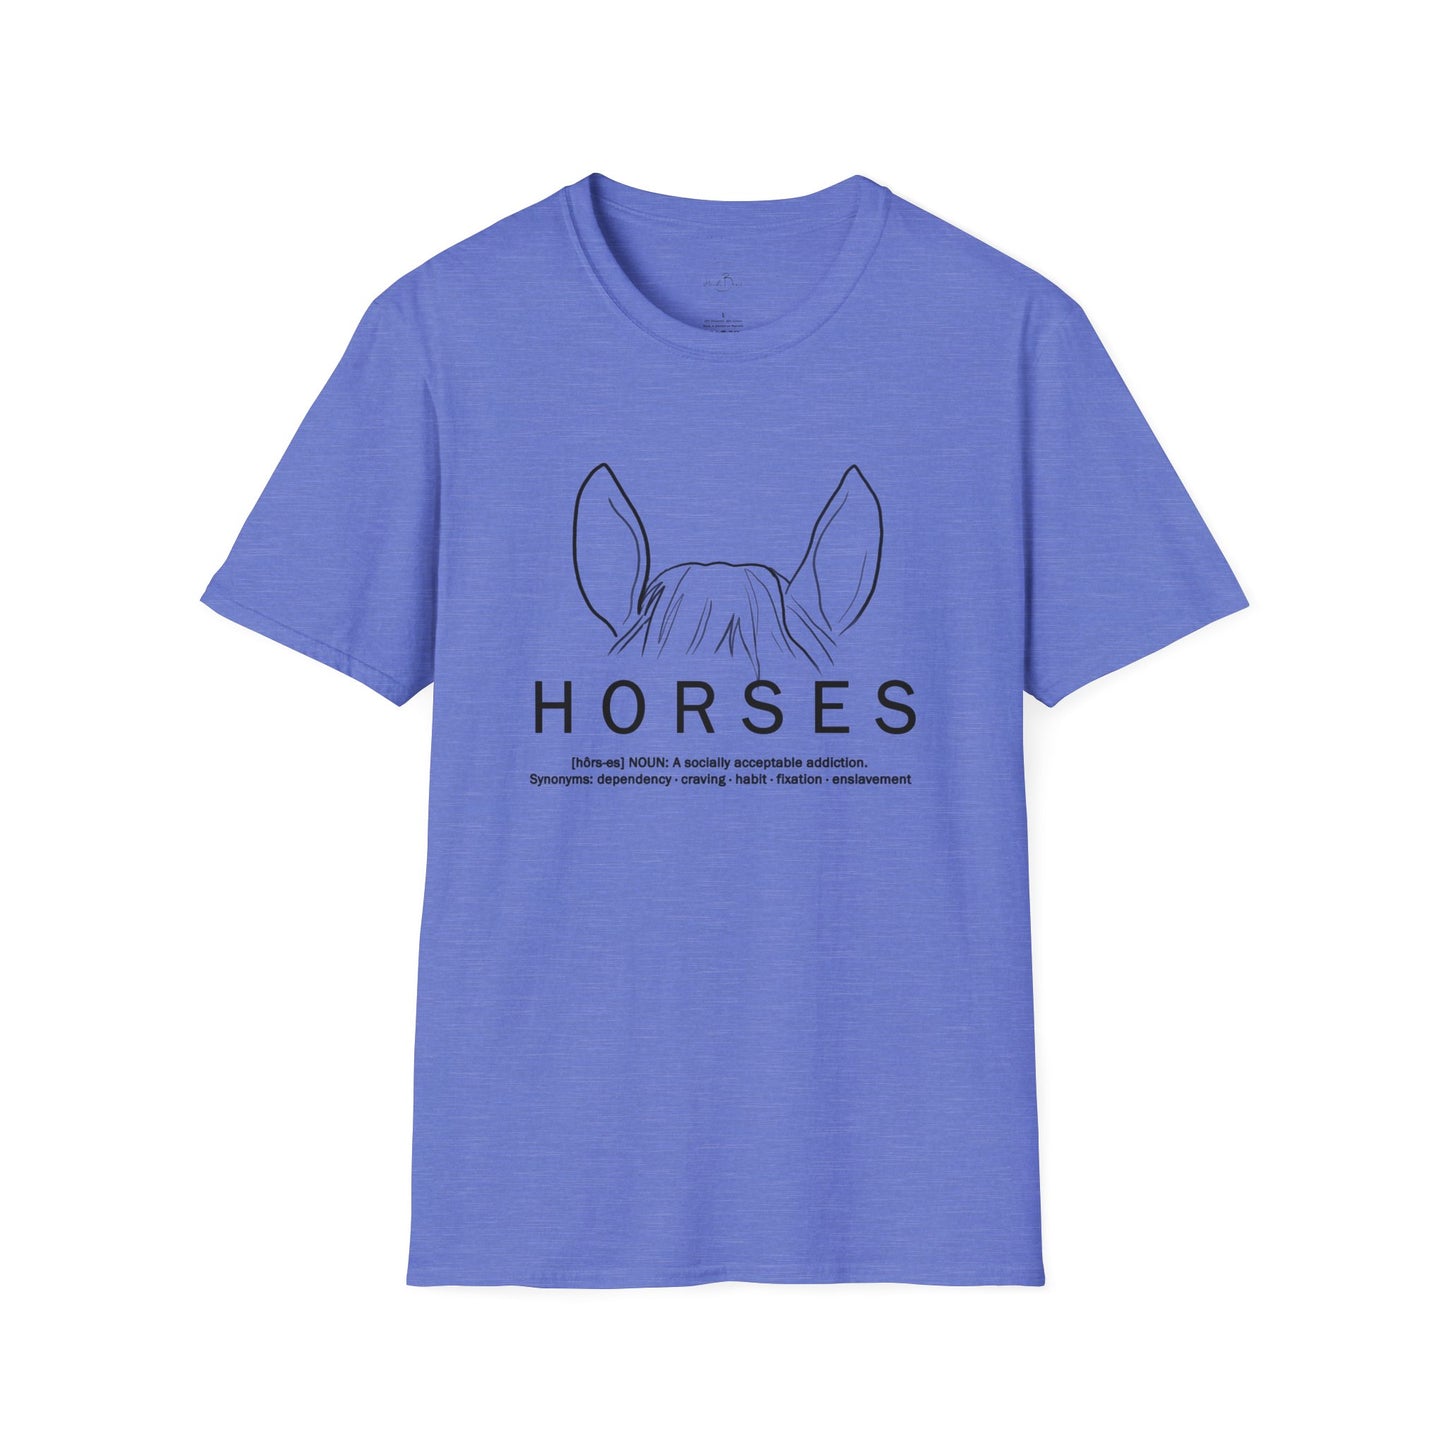 H O R S E - Definition - Funny T-Shirt for Horse Lovers